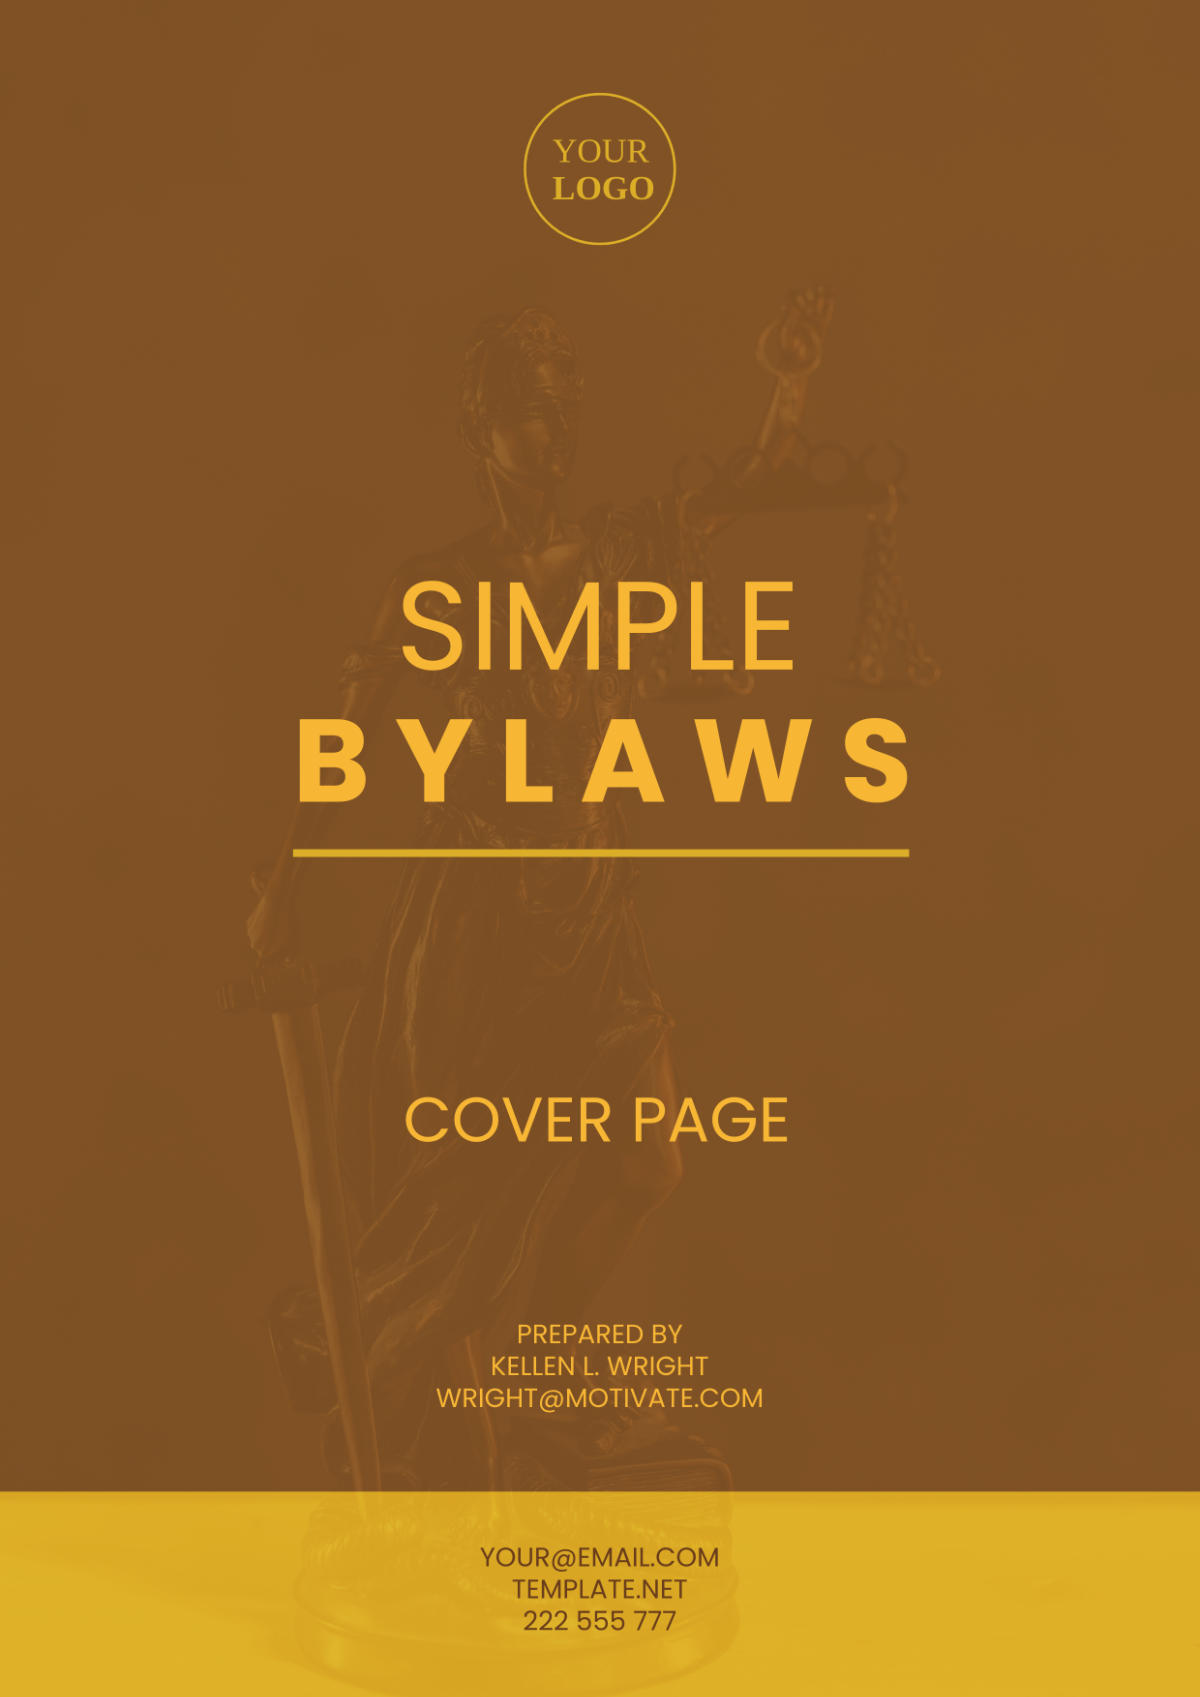 Simple Bylaws Cover Page